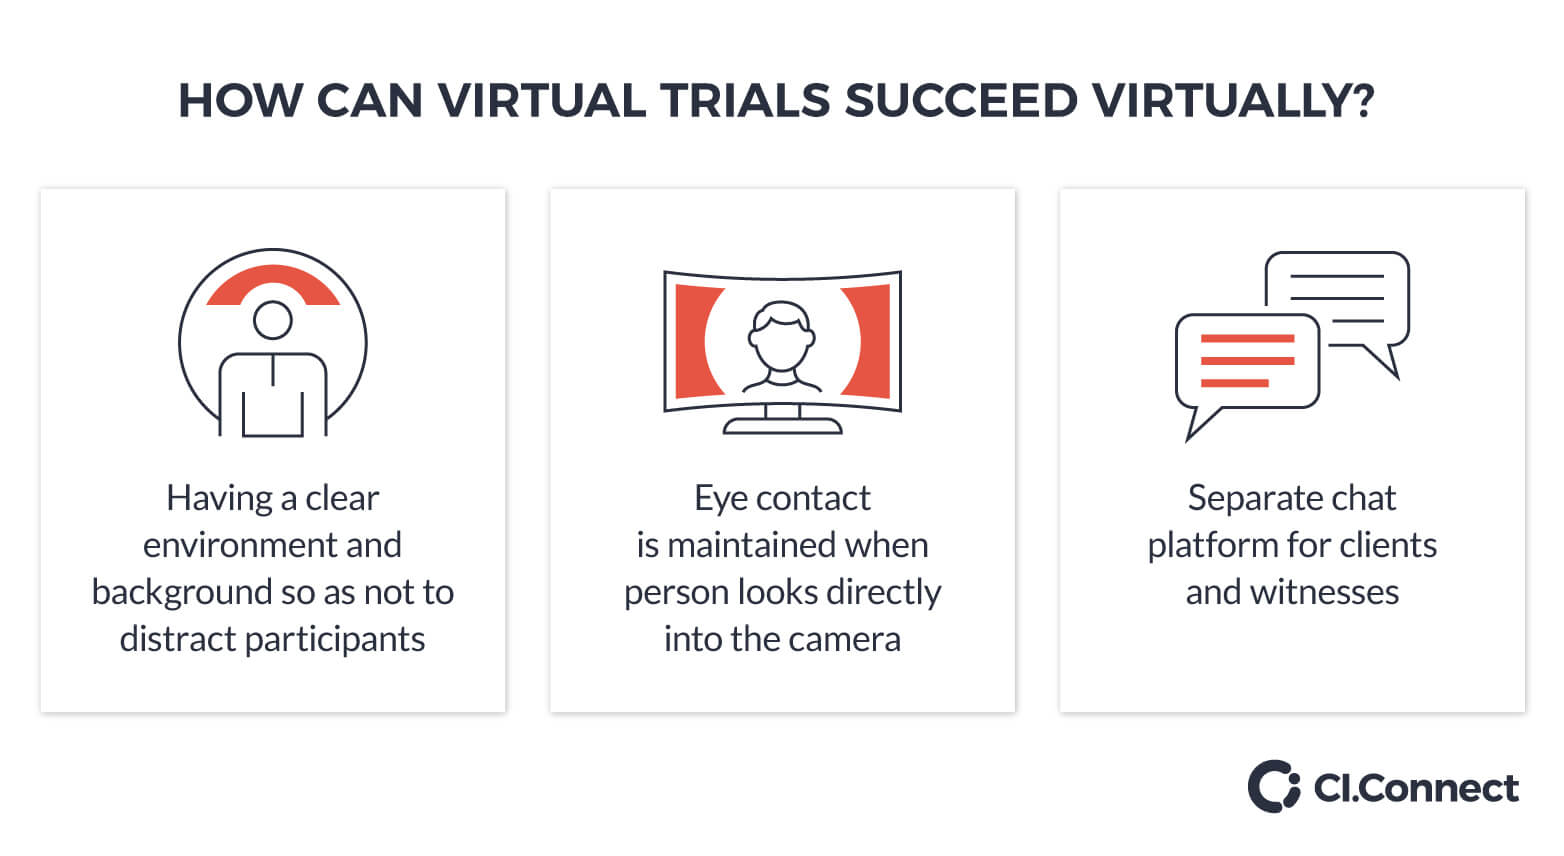 How can virtual trials succeed virtually?